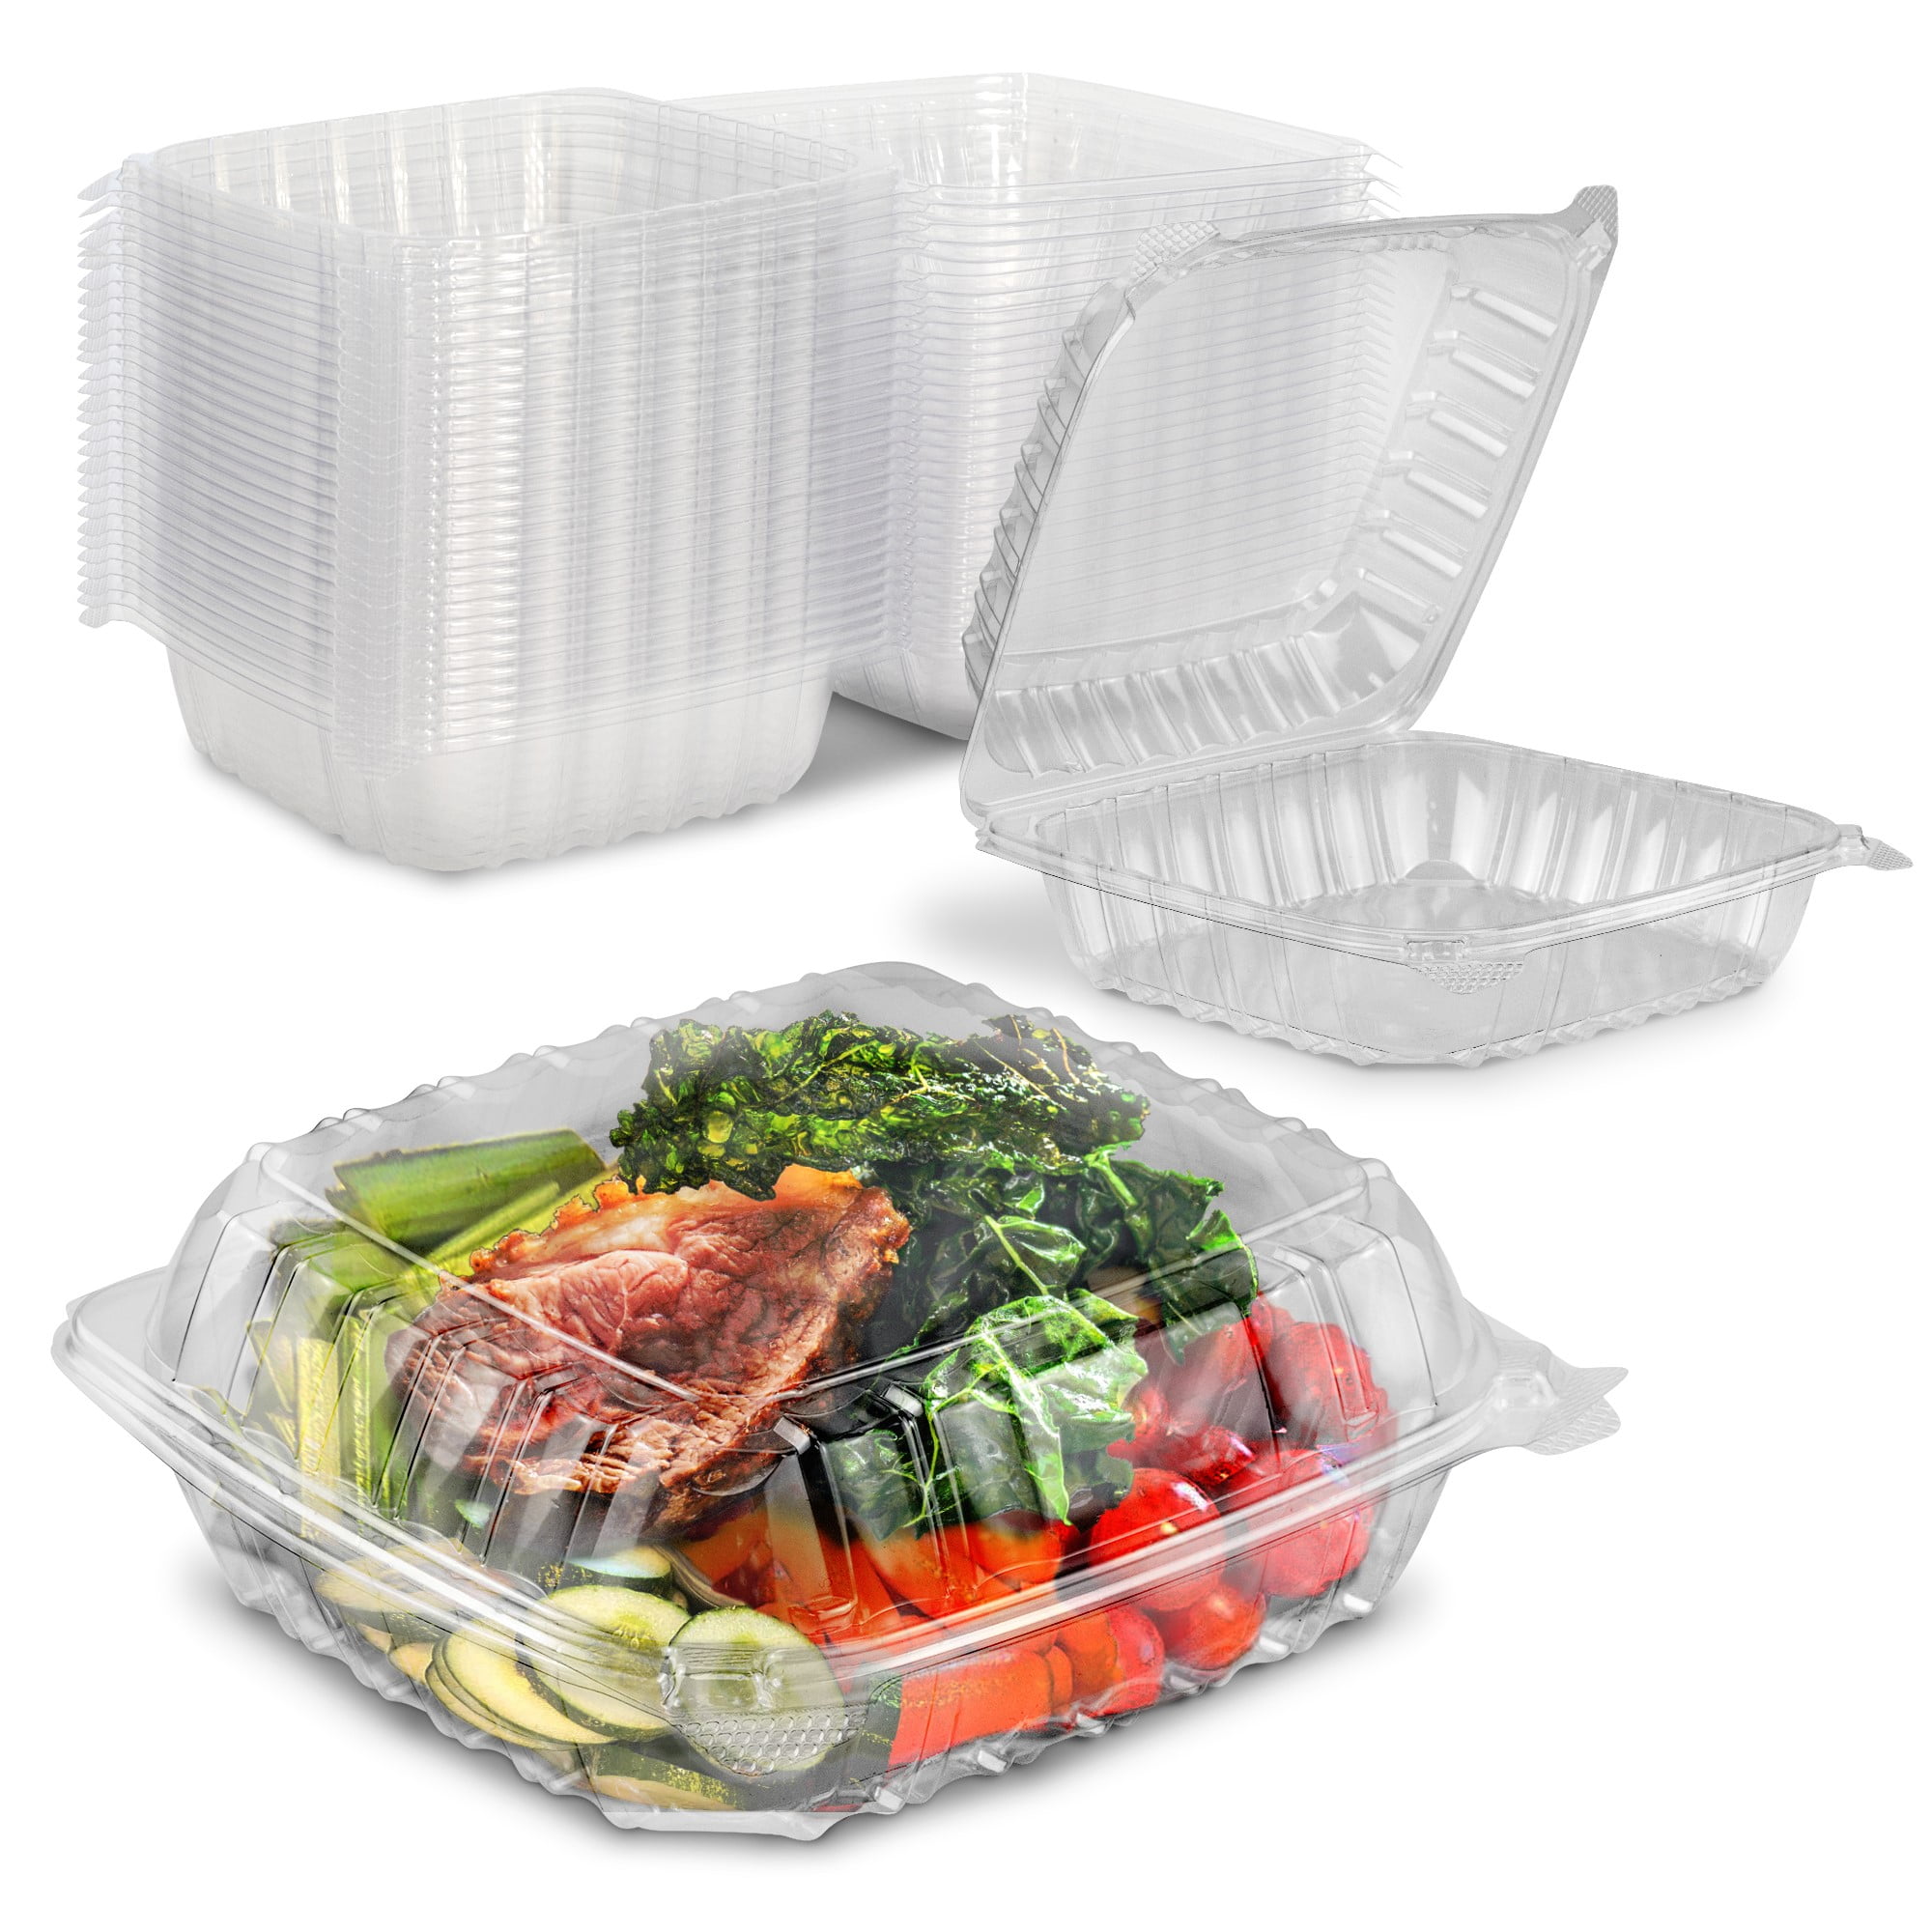 25 Clear Plastic 7" Food Take Out Clamshell Container Bread For Sponge Cake 